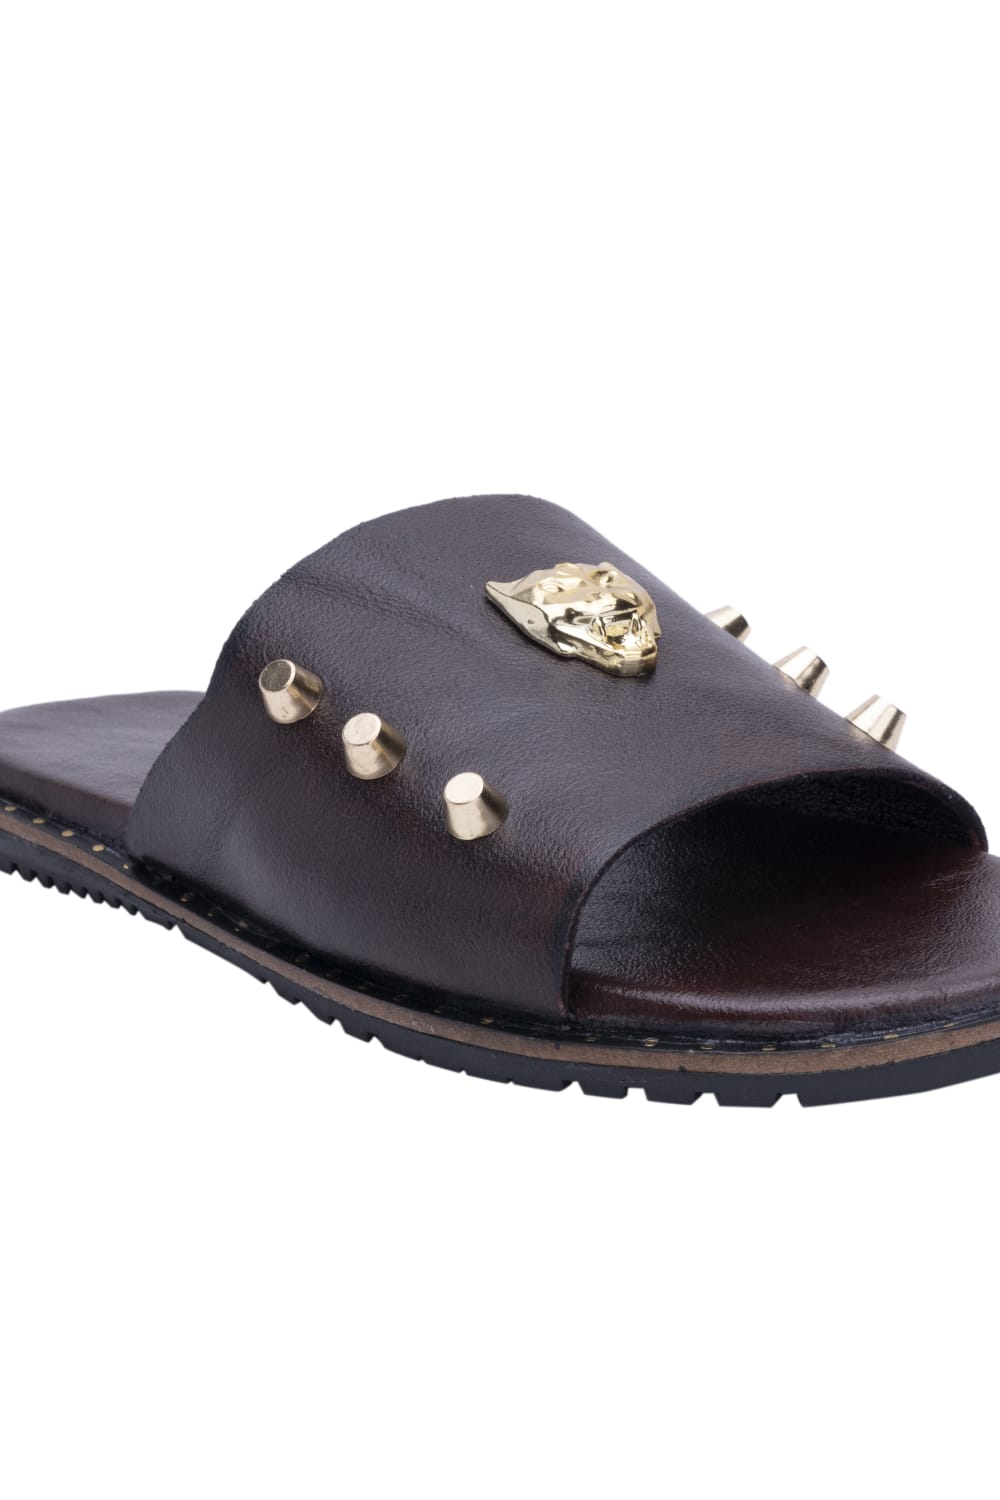 Brown Lion Studded Chappals